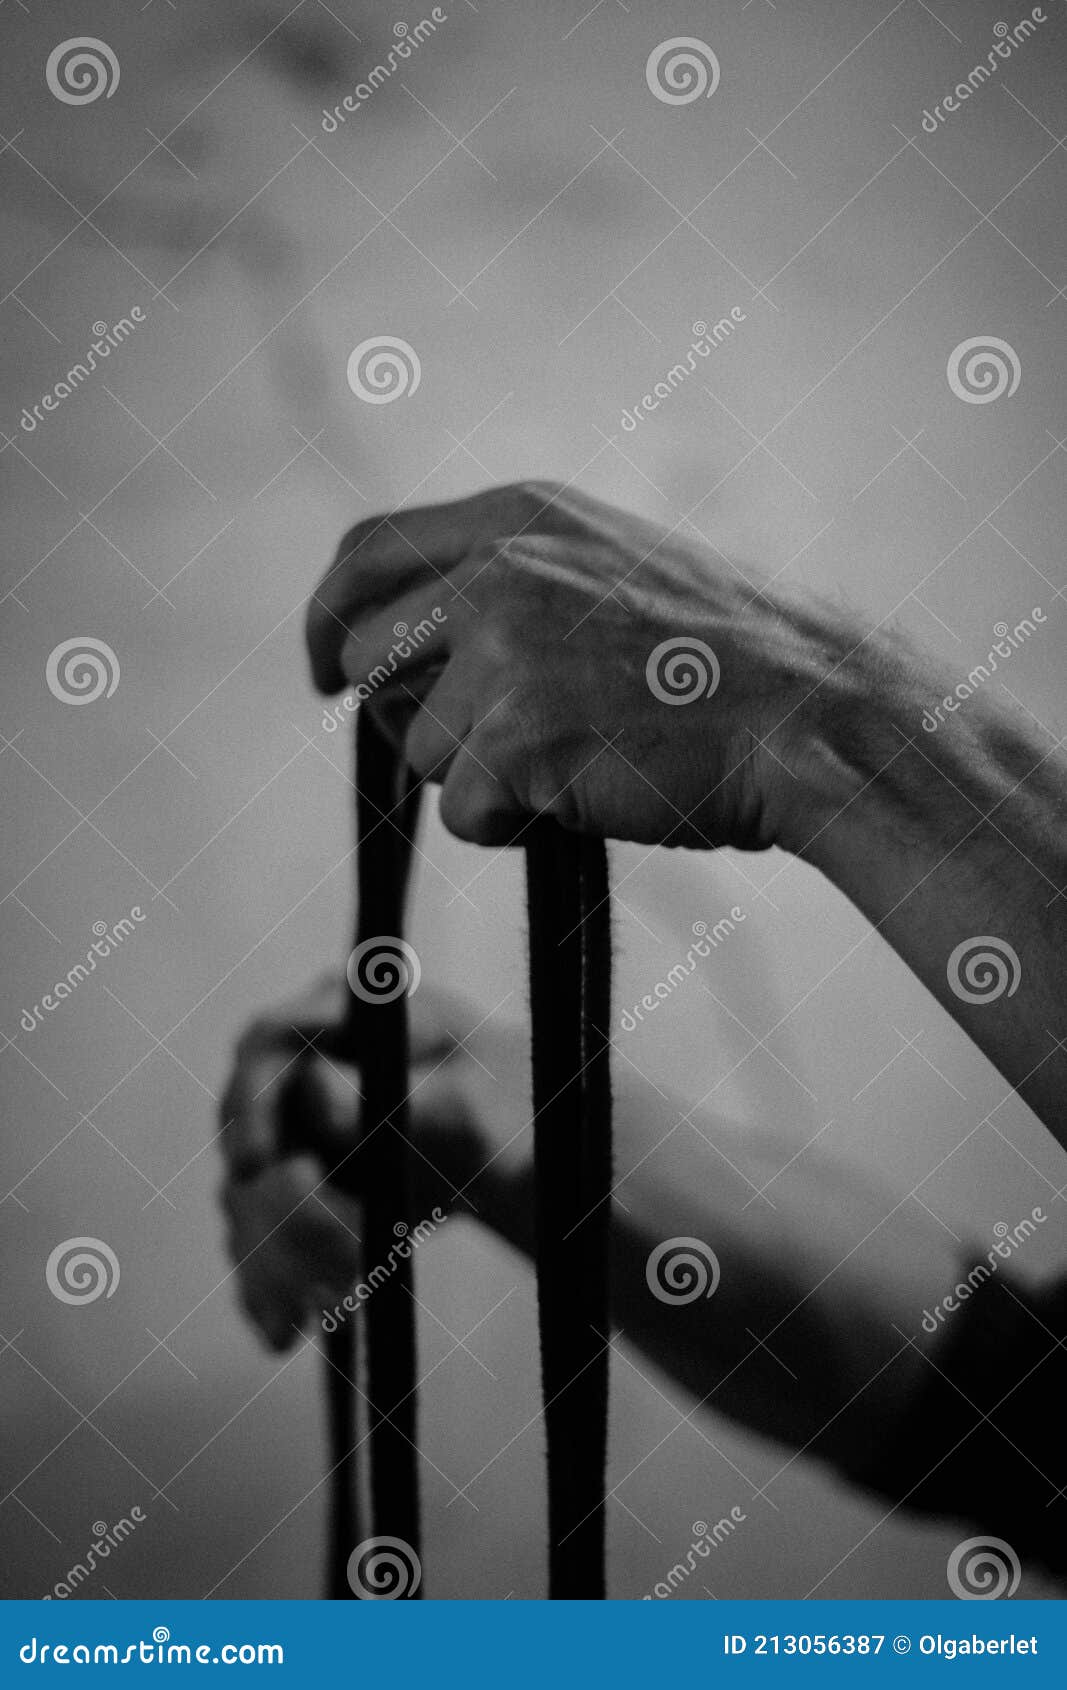 A Man Holds Black Shibari Ropes in His Hand Stock Image - Image of hold ...